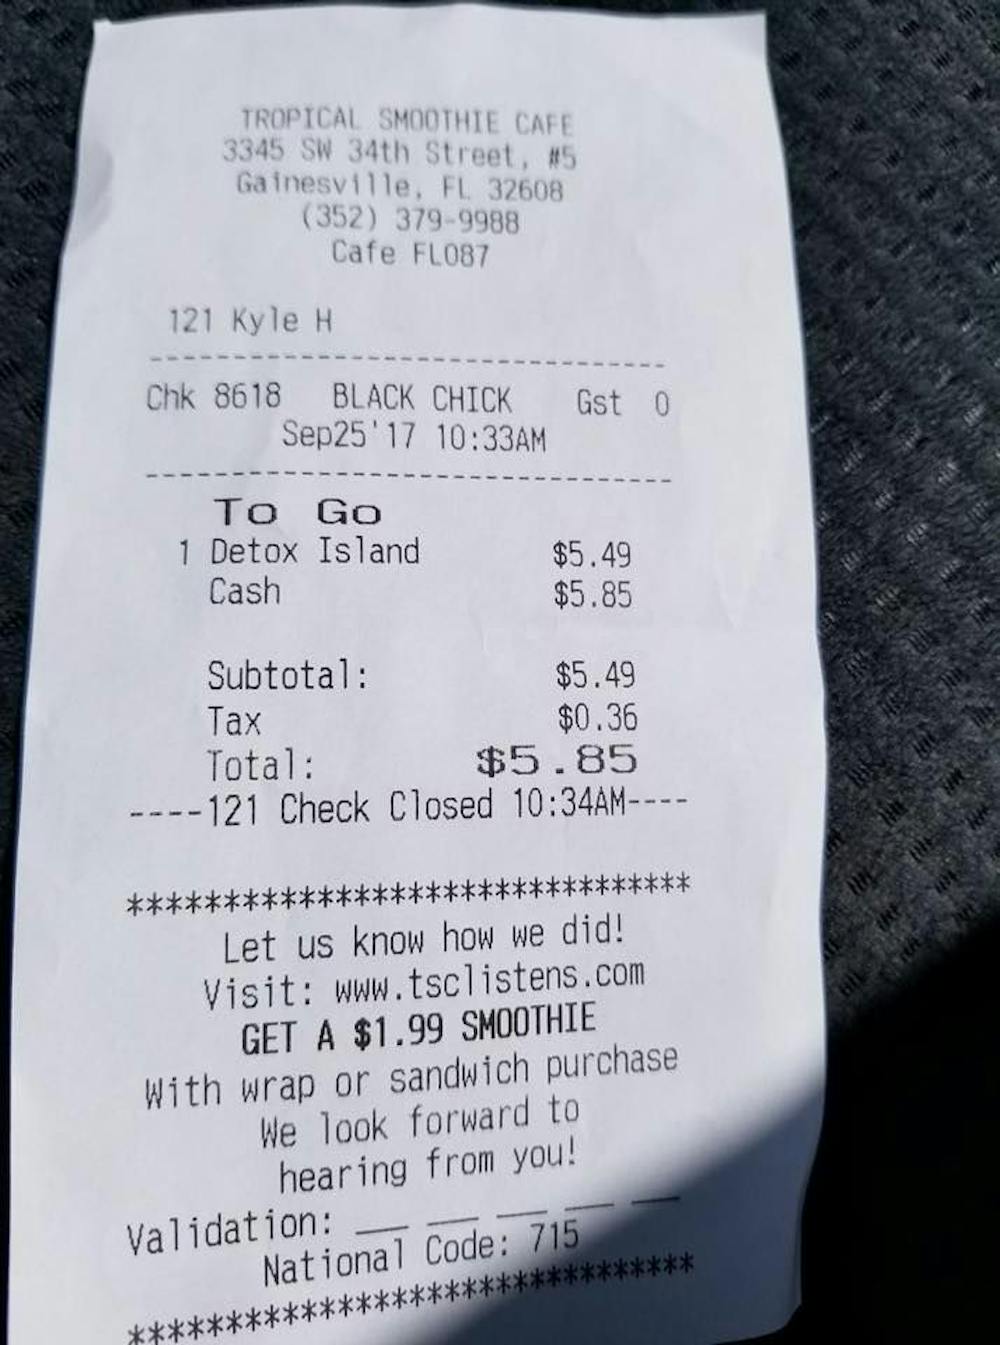 <p><span>Cassandra Peoples, a 47-year-old Gainesville resident, found the words "Black Chick" written in place of her name on her receipt&nbsp;</span><span class="aBn" data-term="goog_2086986432"><span class="aQJ">on Wednesday</span></span><span>&nbsp;morning after shopping at Tropical Smoothie Cafe, located at&nbsp;</span>3345 SW 34th St<span>.</span></p>